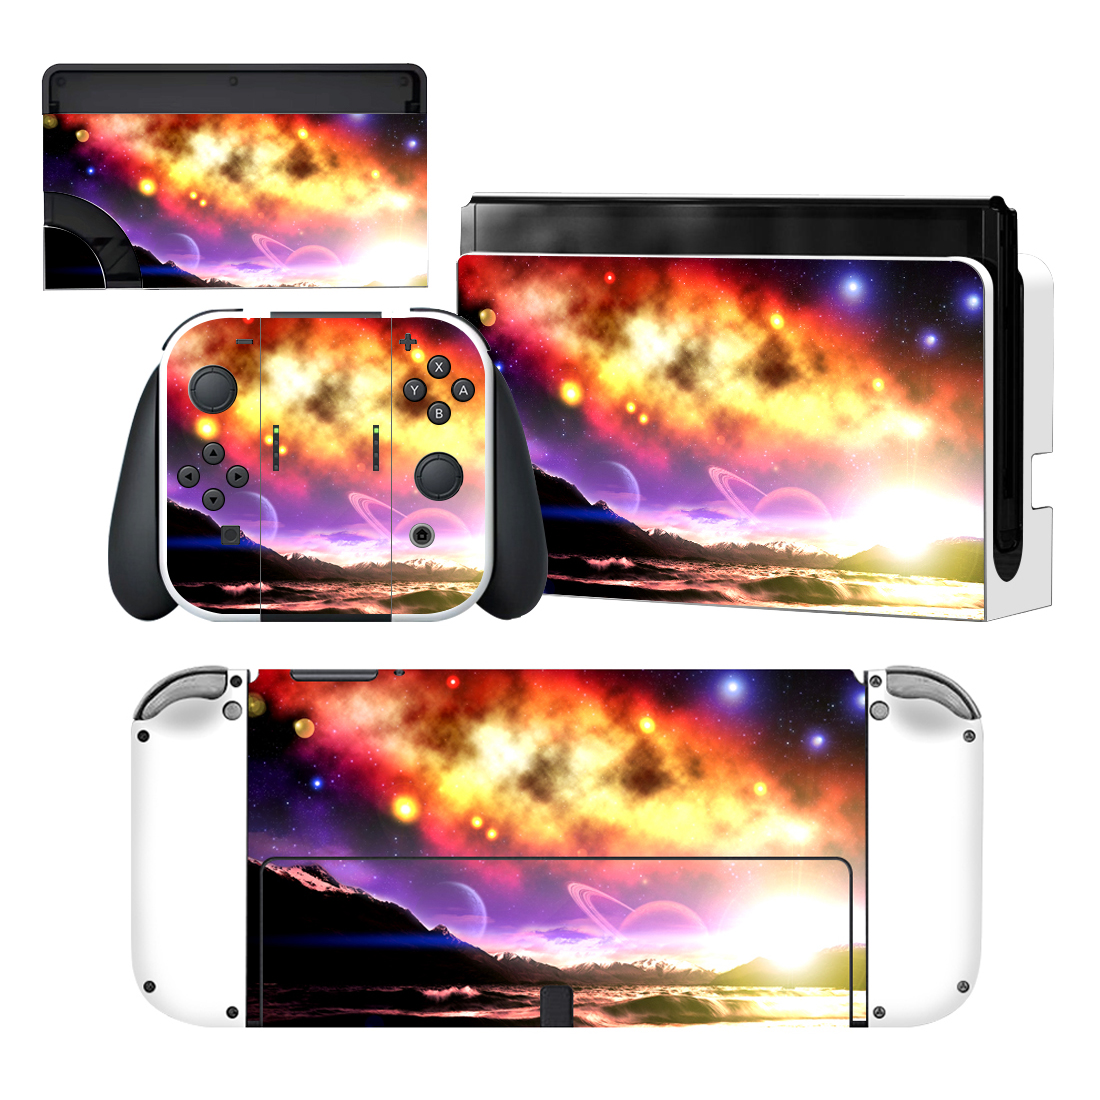 Space Nintendo Switch OLED Skin Sticker Decal